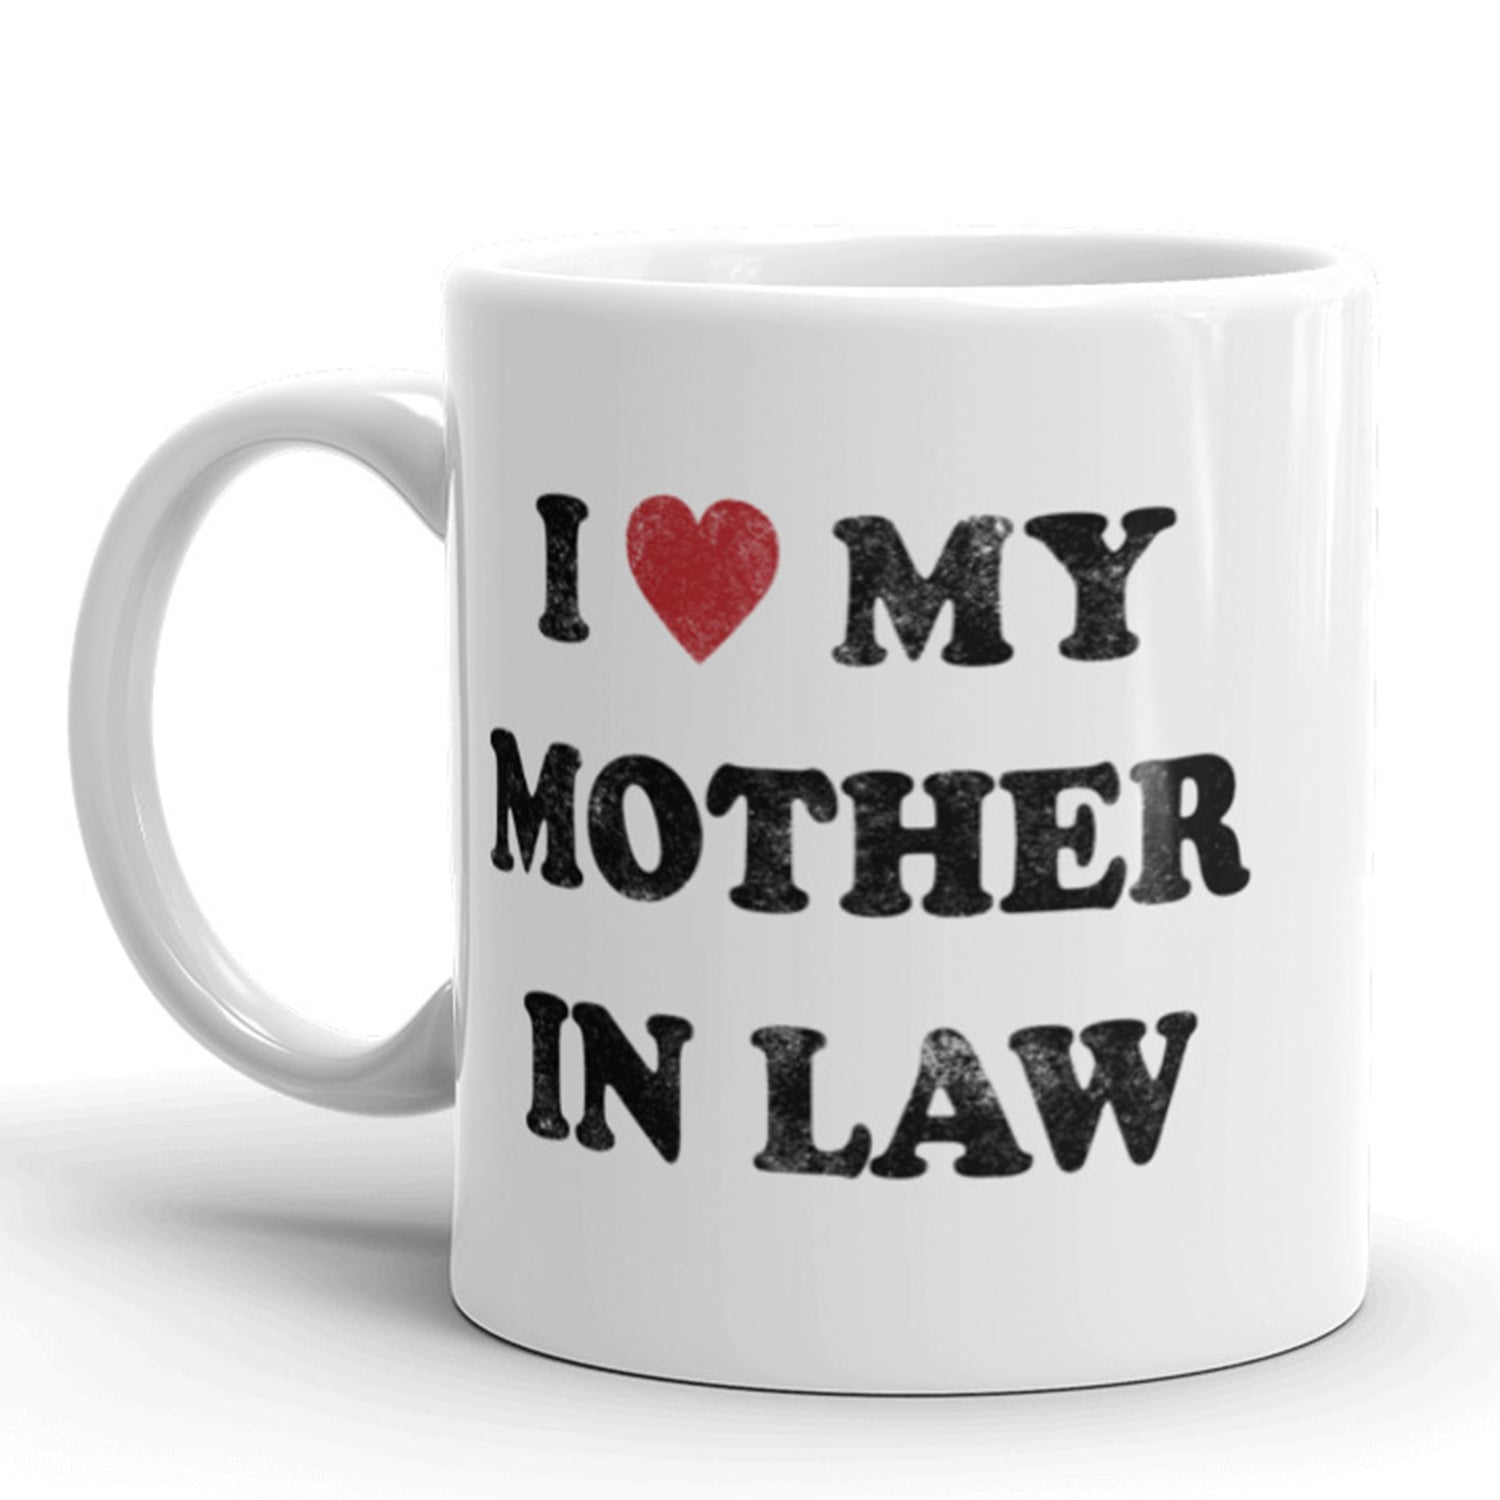 Mother In Law Gift Mother-In-Law Wedding Mother In Law Mug - Etsy - Mother  in law gifts, In law gifts, Motherinlaw gifts